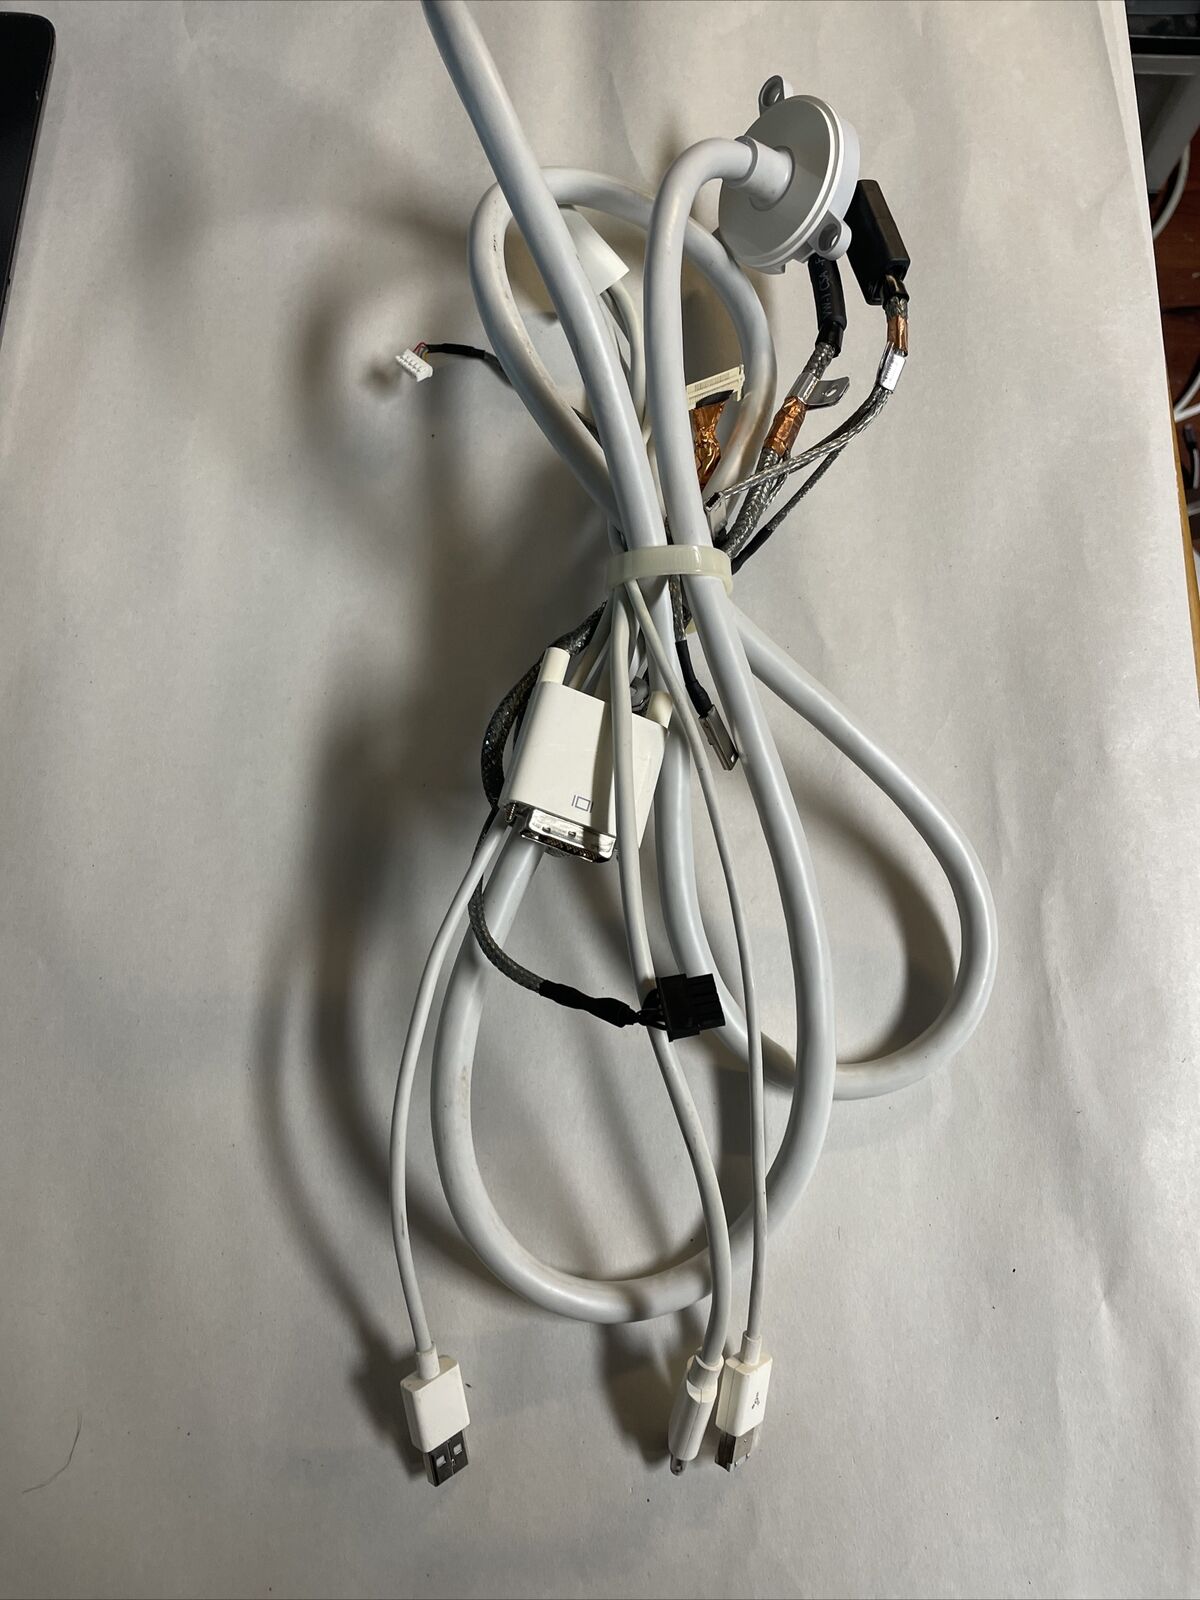 Apple A1083 Cinema HD Display All In One Main Power Cable Assy 30” Monitor MB136